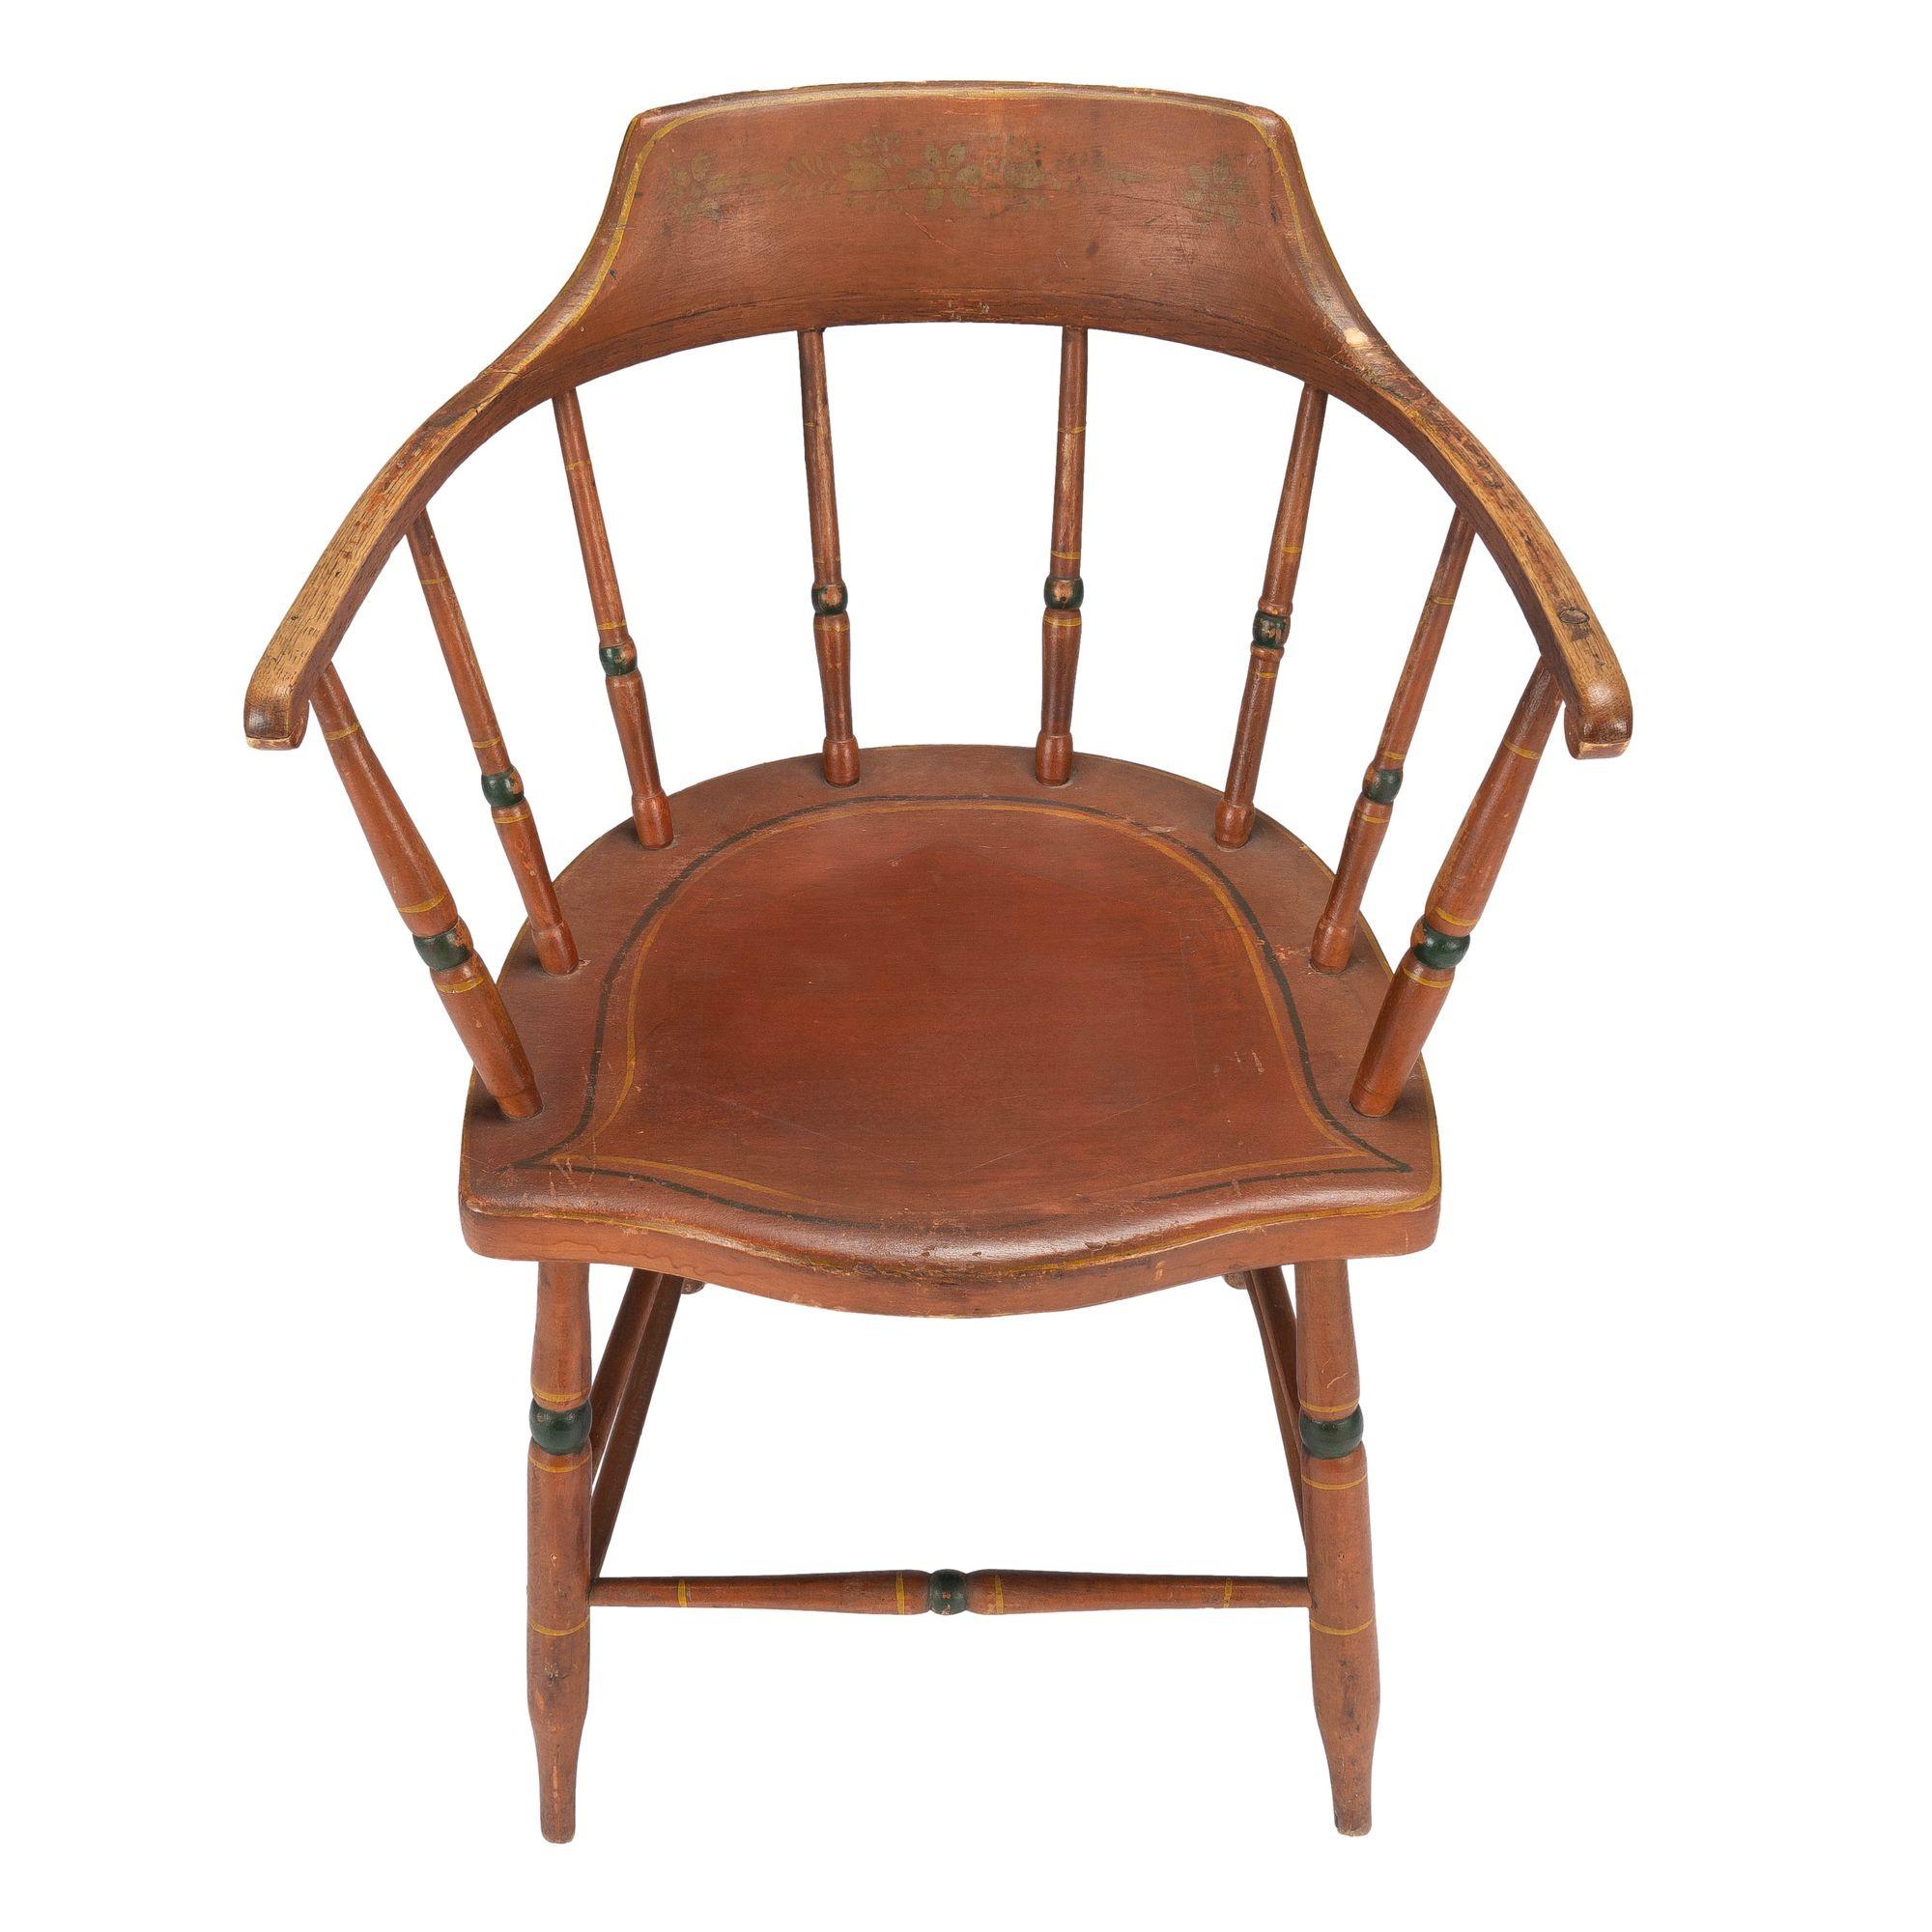 American Painted Windsor Captain's Chair, c. 1820 For Sale 3